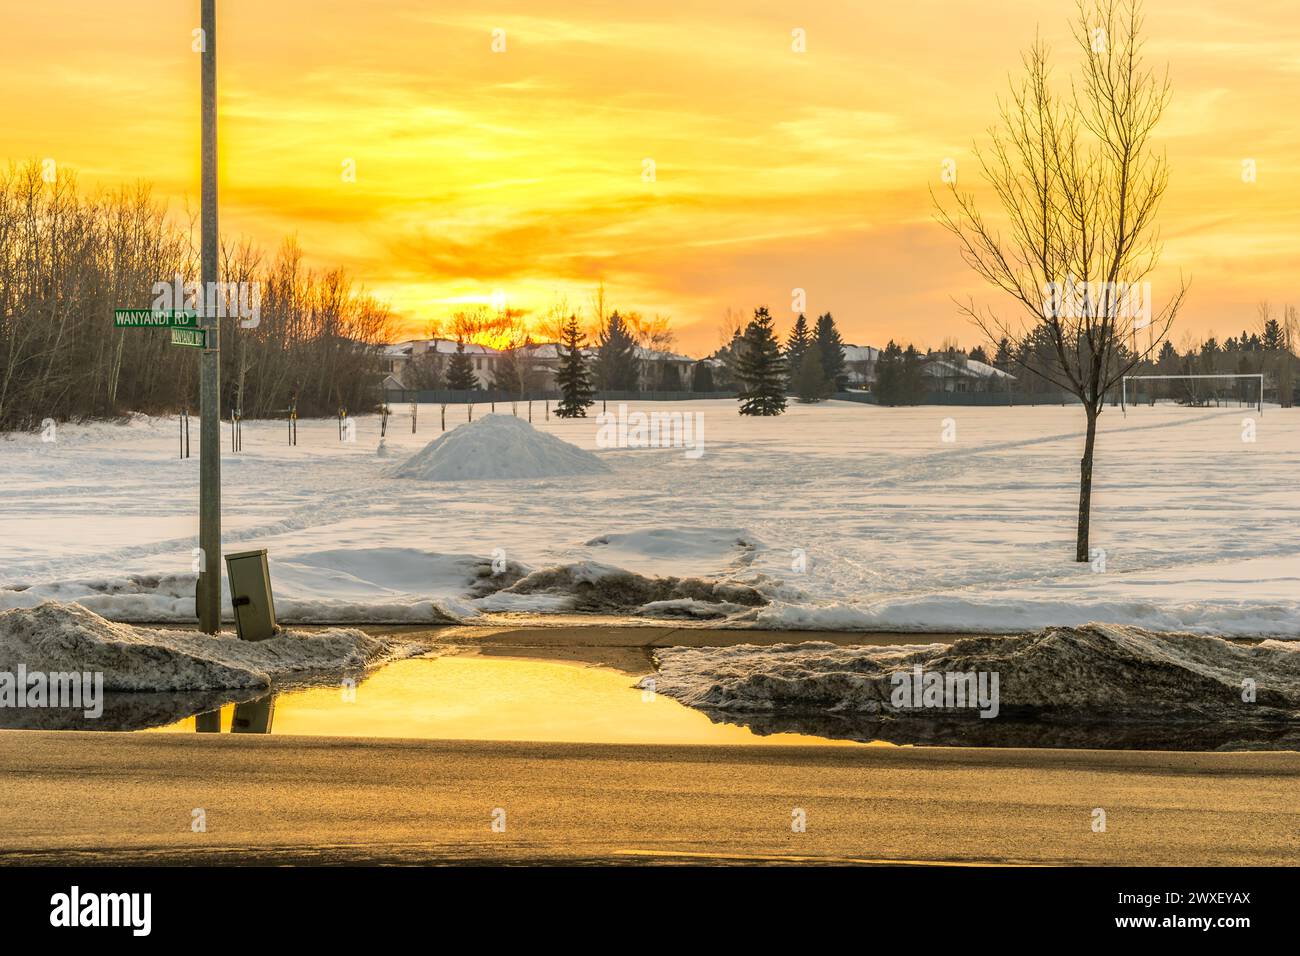 Orange color reflection on puddle from melted snow at the edge of sidewalk at sunset time in early spring season Stock Photo